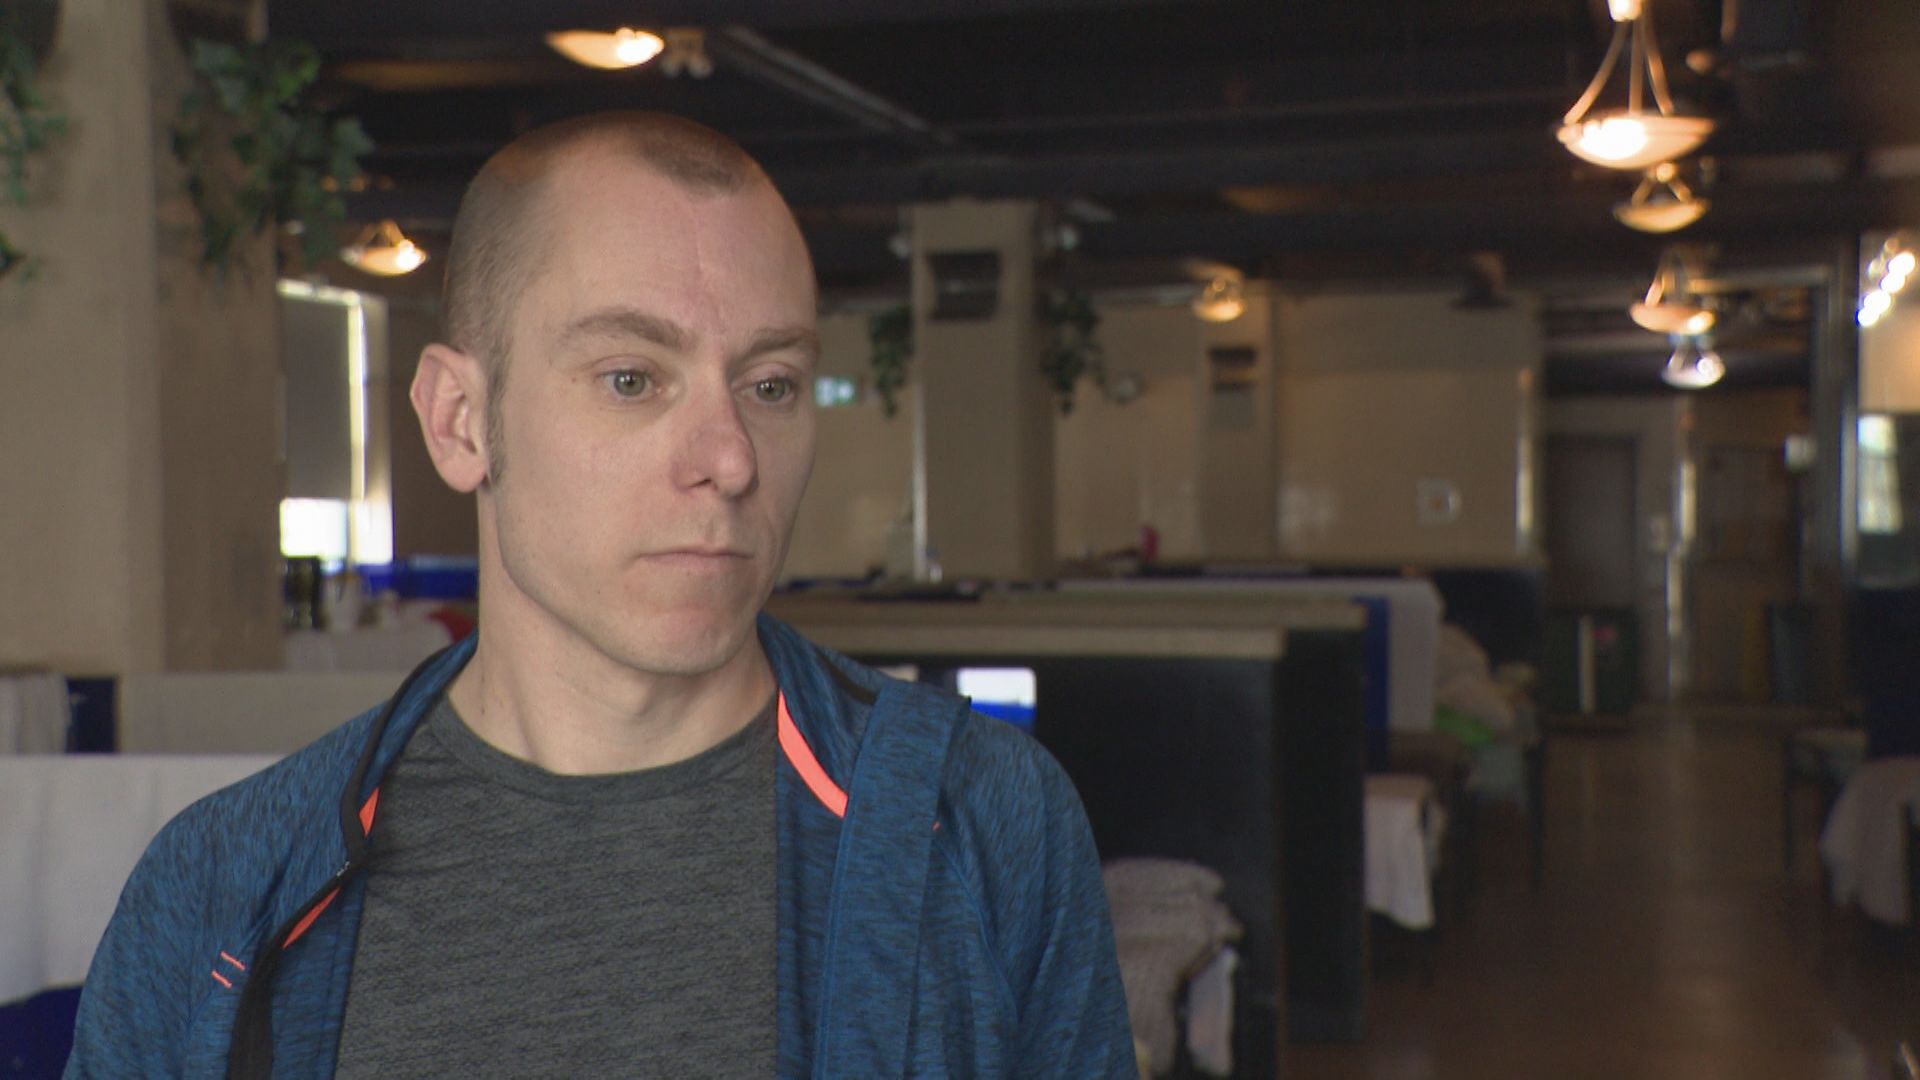 Shelters and warming centres a ‘short-term solution’, says Winnipeg shelter